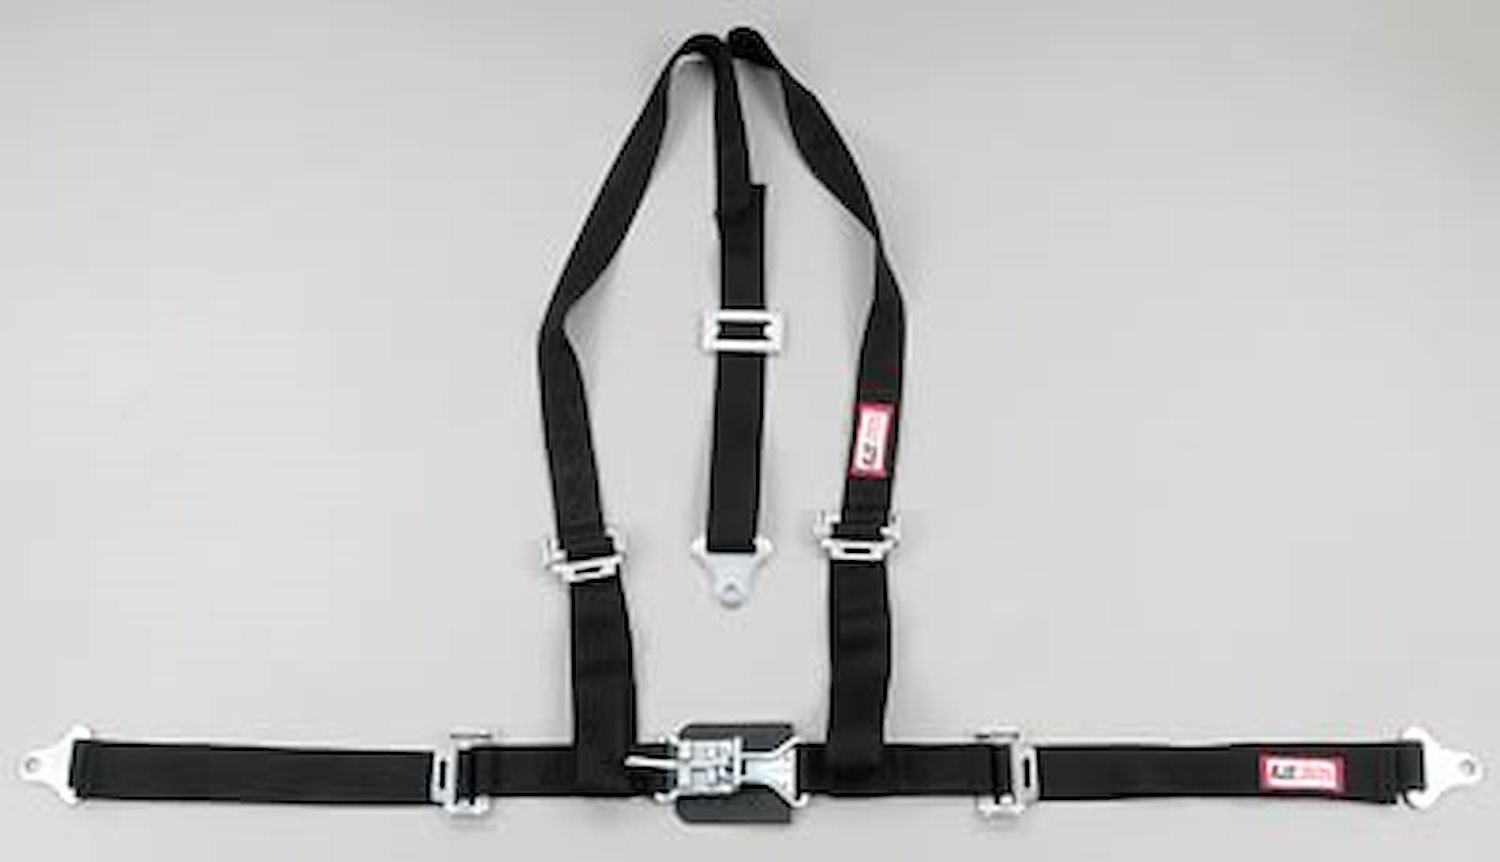 NON-SFI L&L HARNESS 3 PULL UP Lap Belt SNAP SEWN IN 2 S.H. Individual ROLL BAR Mount w/STERNUM STRAP WRAP/BOLT BLUE